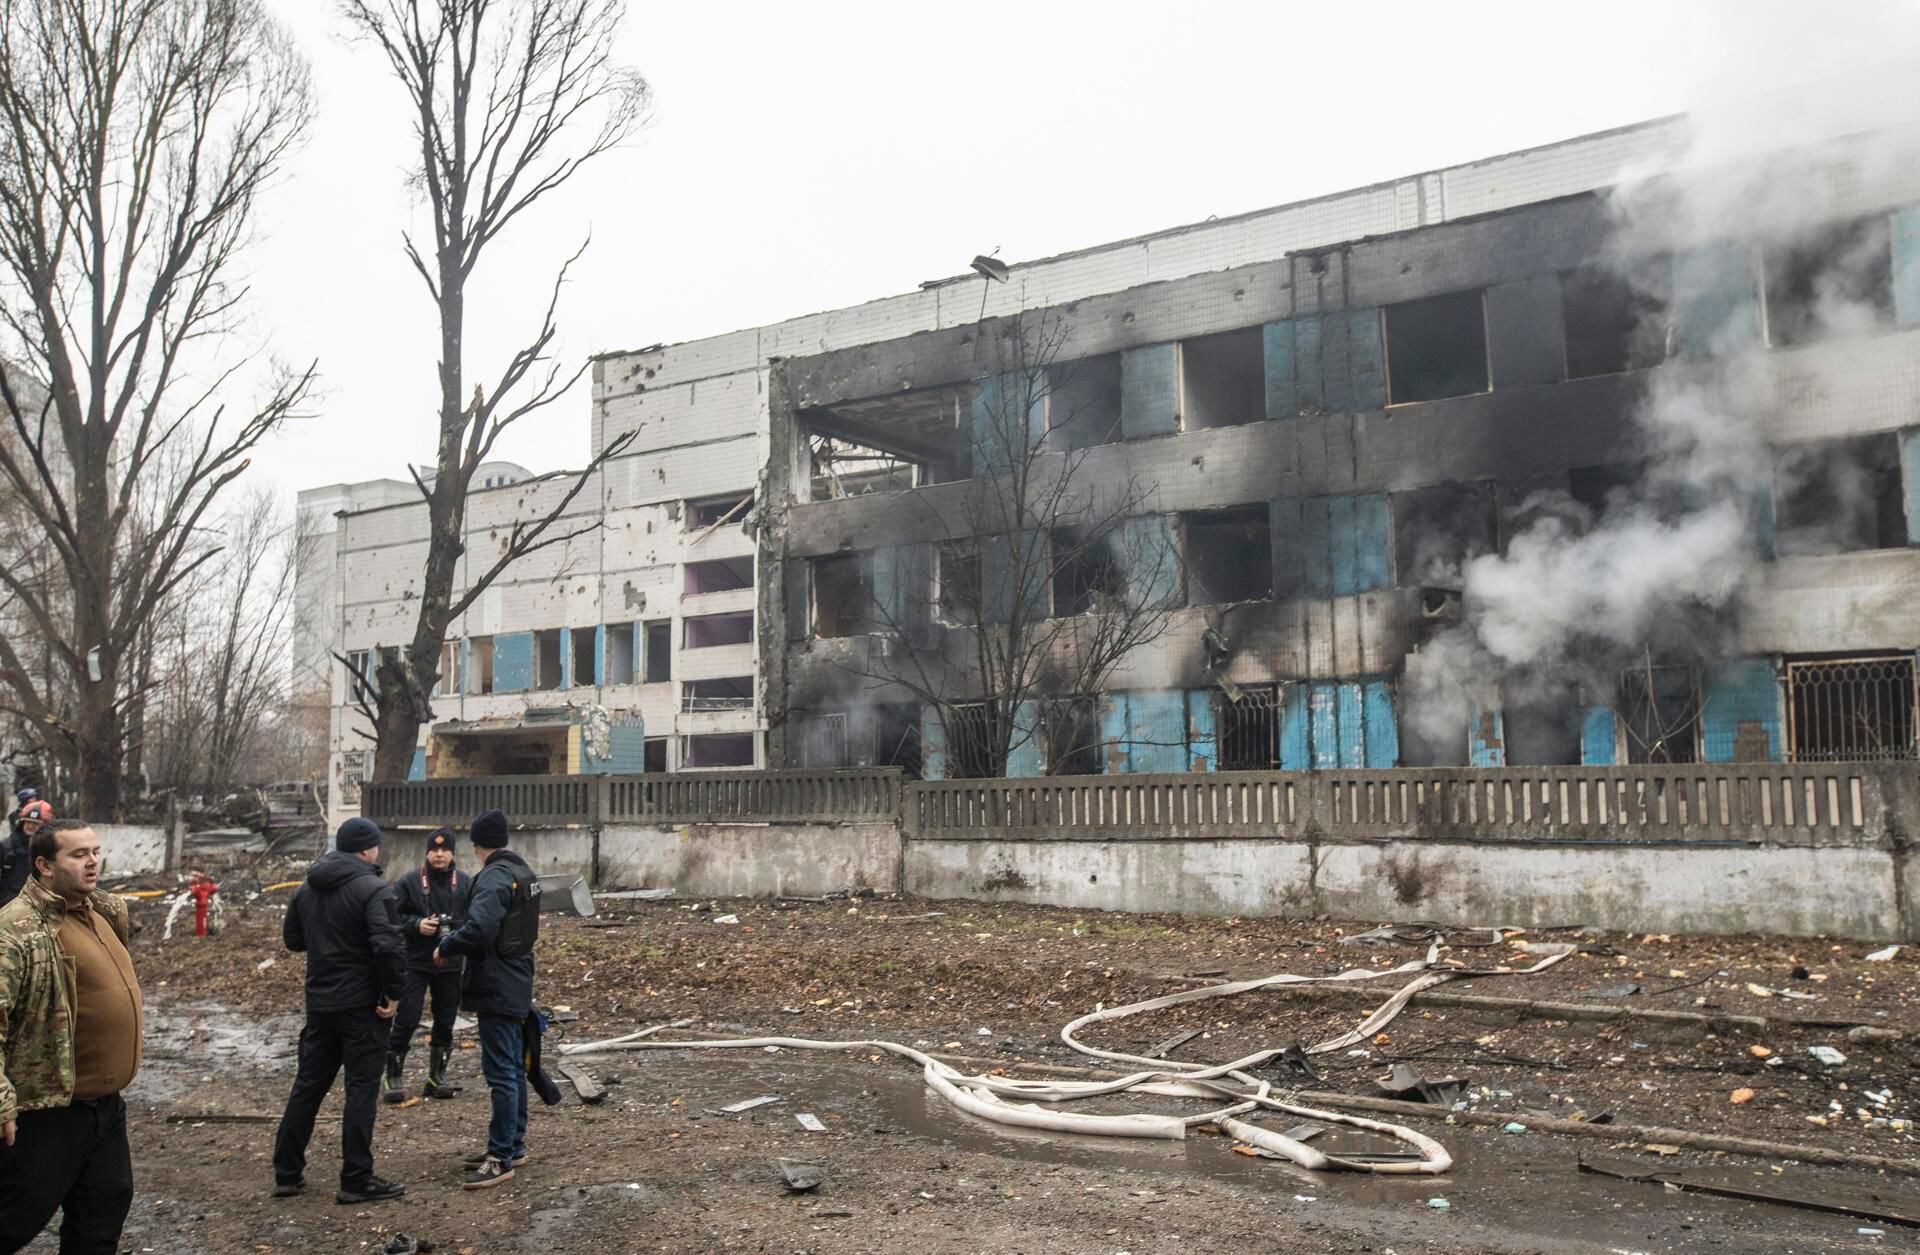 A Ukrainian official near the site of a nighttime rocket attack on a maternity hospital in Dnipro, Dnipropetrovsk region, southeastern Ukraine, on December 29, 2023. (EFE/EPA/ARSEN DZODZAIEV).